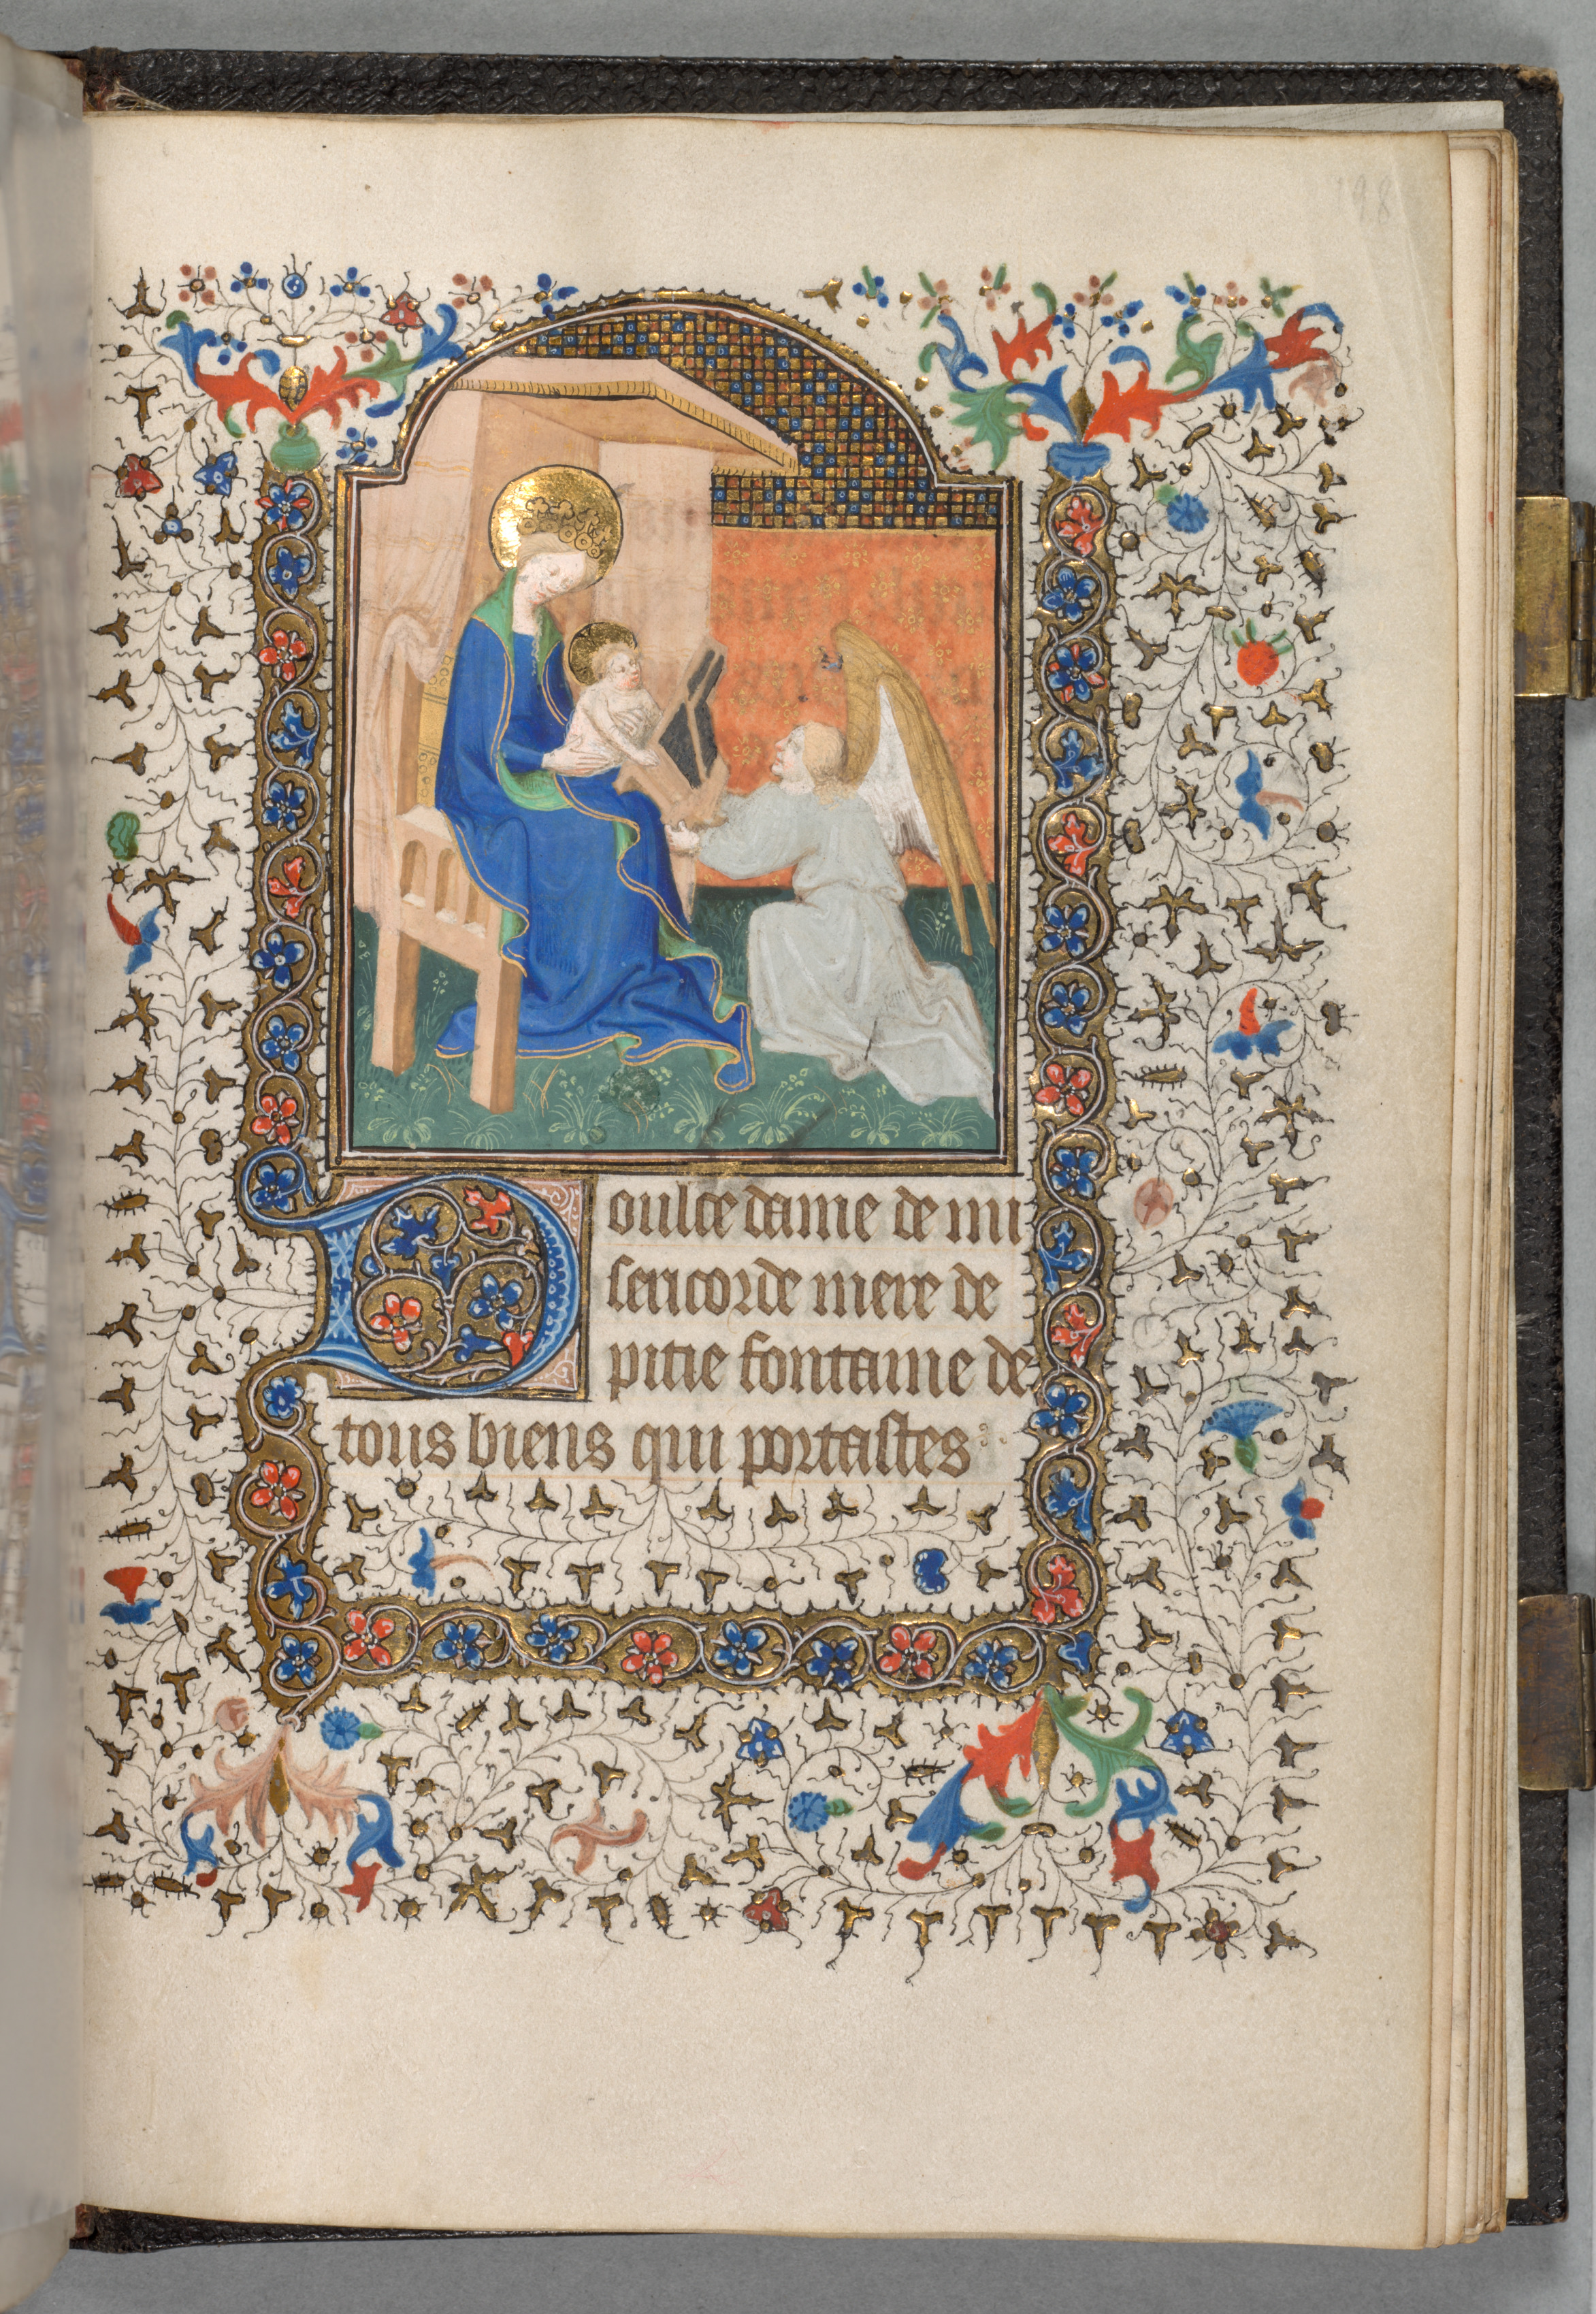 Book of Hours (Use of Paris): Fol. 198r, Madonna and Child with Angel